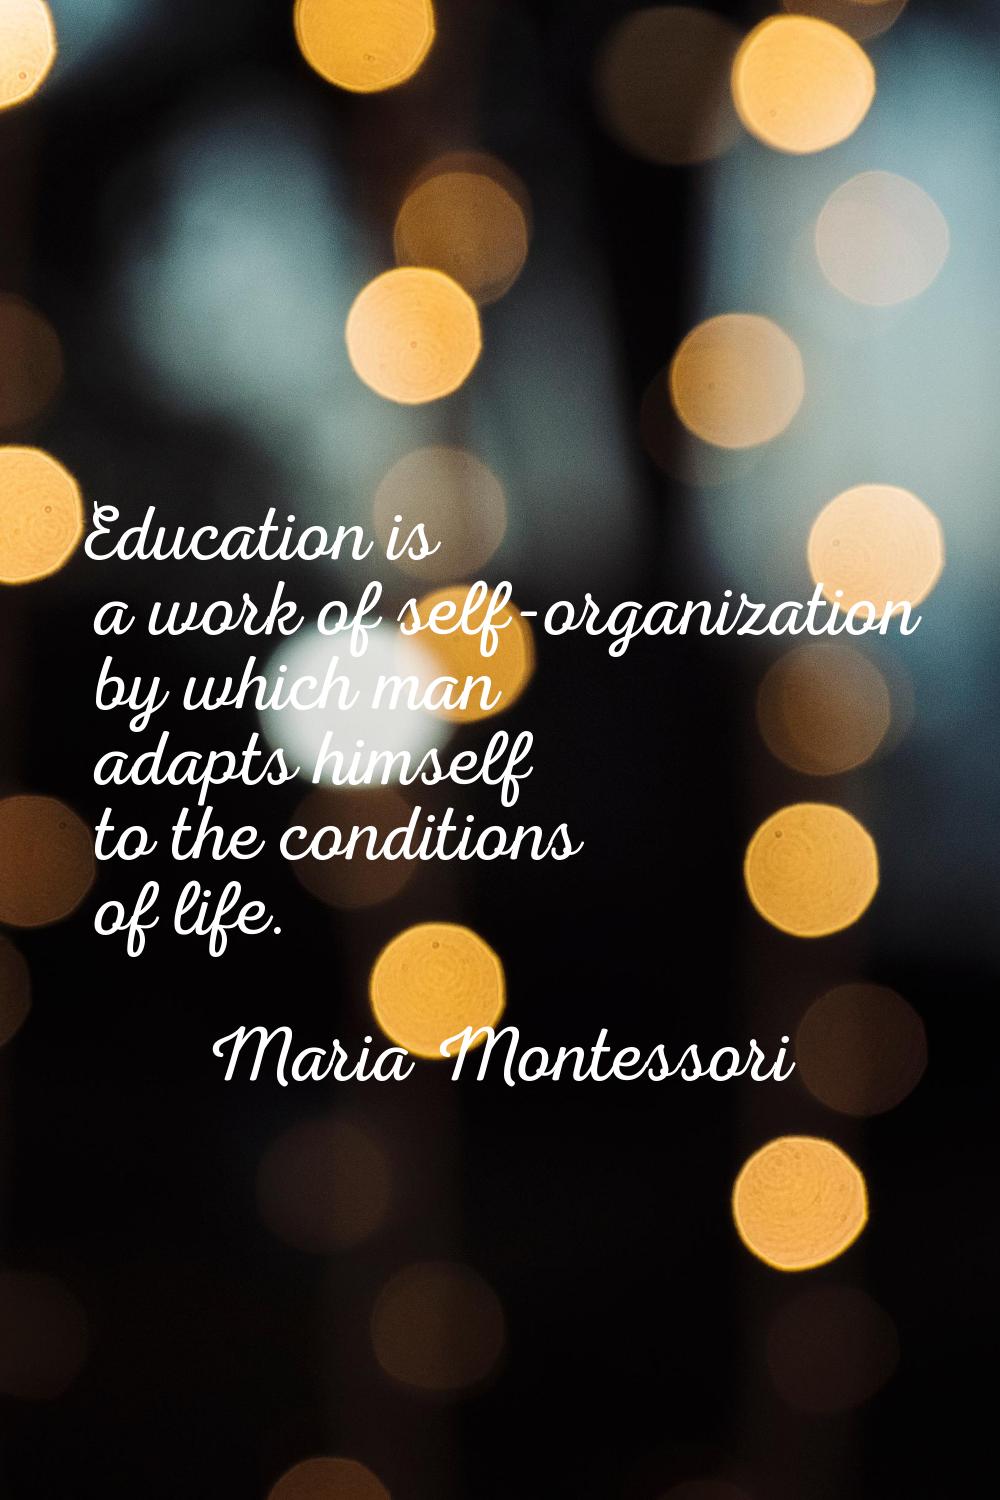 Education is a work of self-organization by which man adapts himself to the conditions of life.